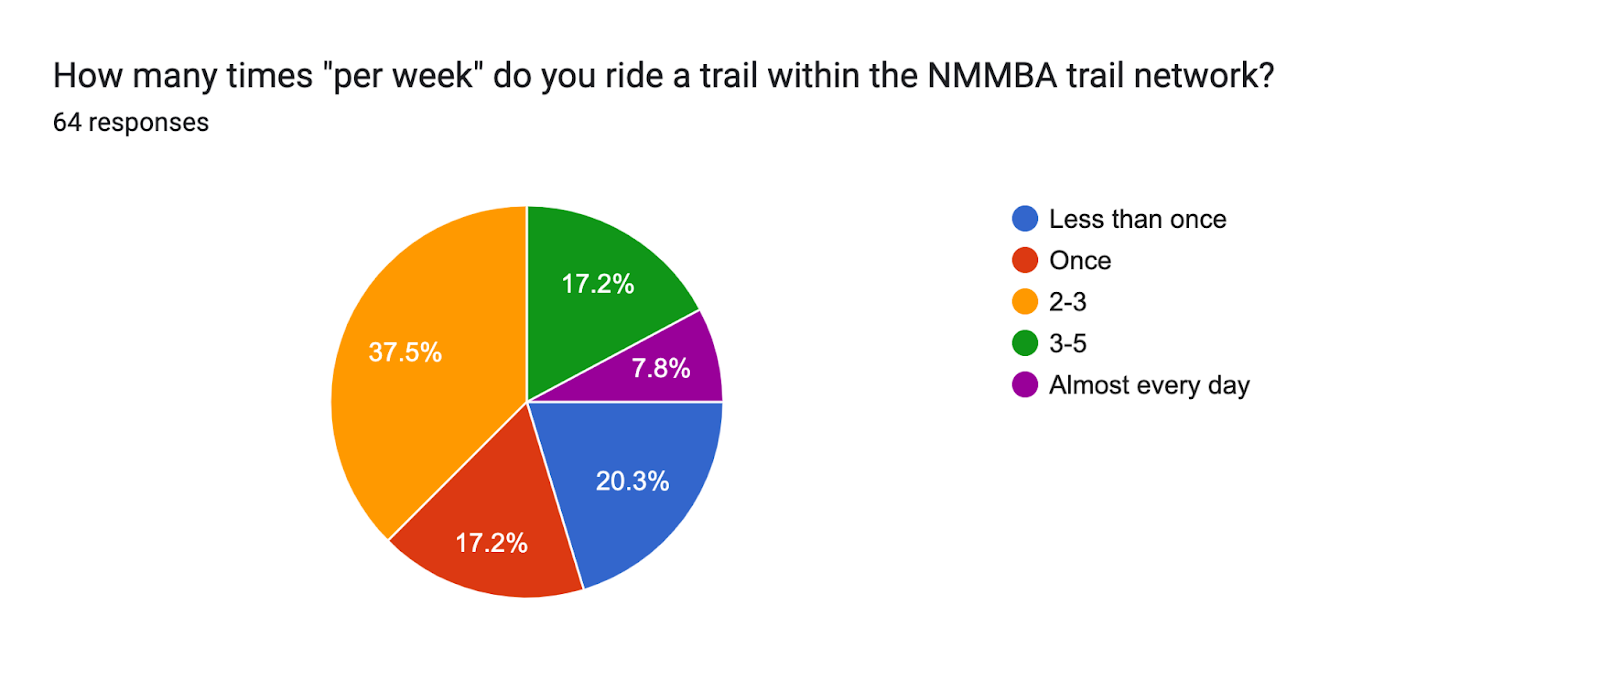 Forms response chart. Question title: How many times "per week" do you ride a trail within the NMMBA trail network?. Number of responses: 64 responses.